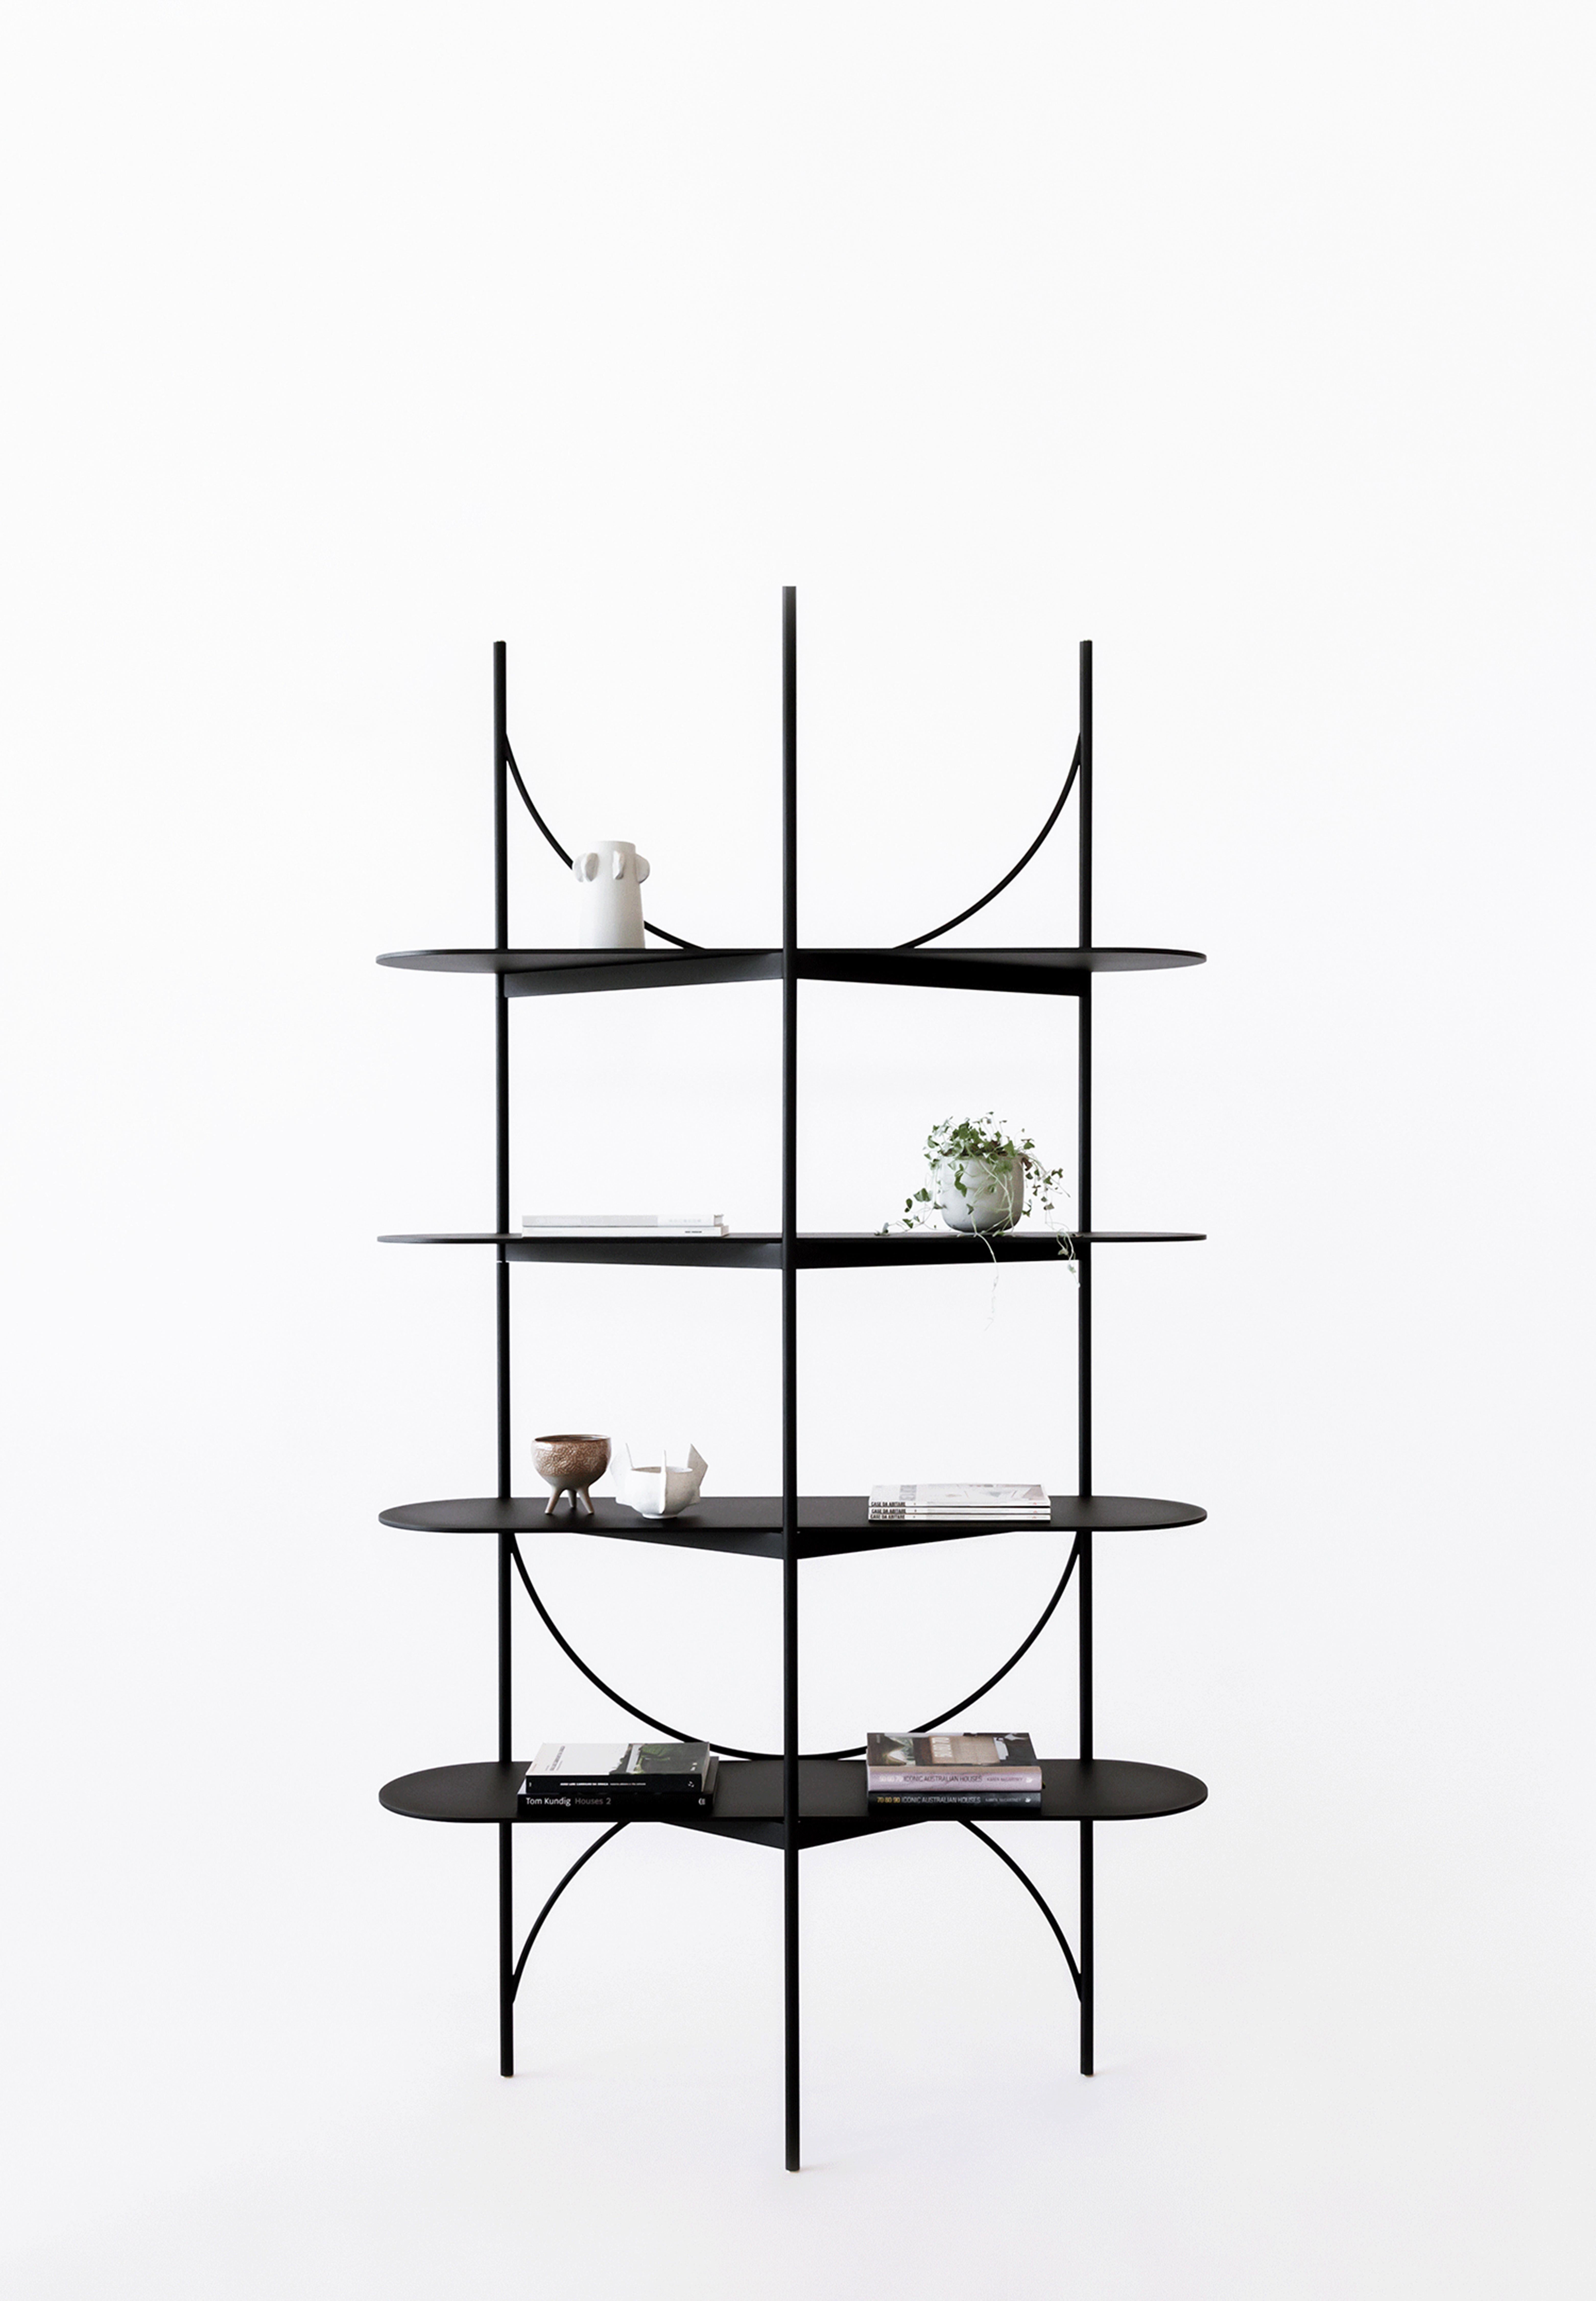 Medium Moored shelving by Rosanna Ceravolo
Dimensions: W 140 x D 42 x H 245 cm
Materials: Powdercoated metal with brass detailing.
Also available in different dimensions and colors.


Rosanna Ceravolo is a Melbourne based architect whose multi